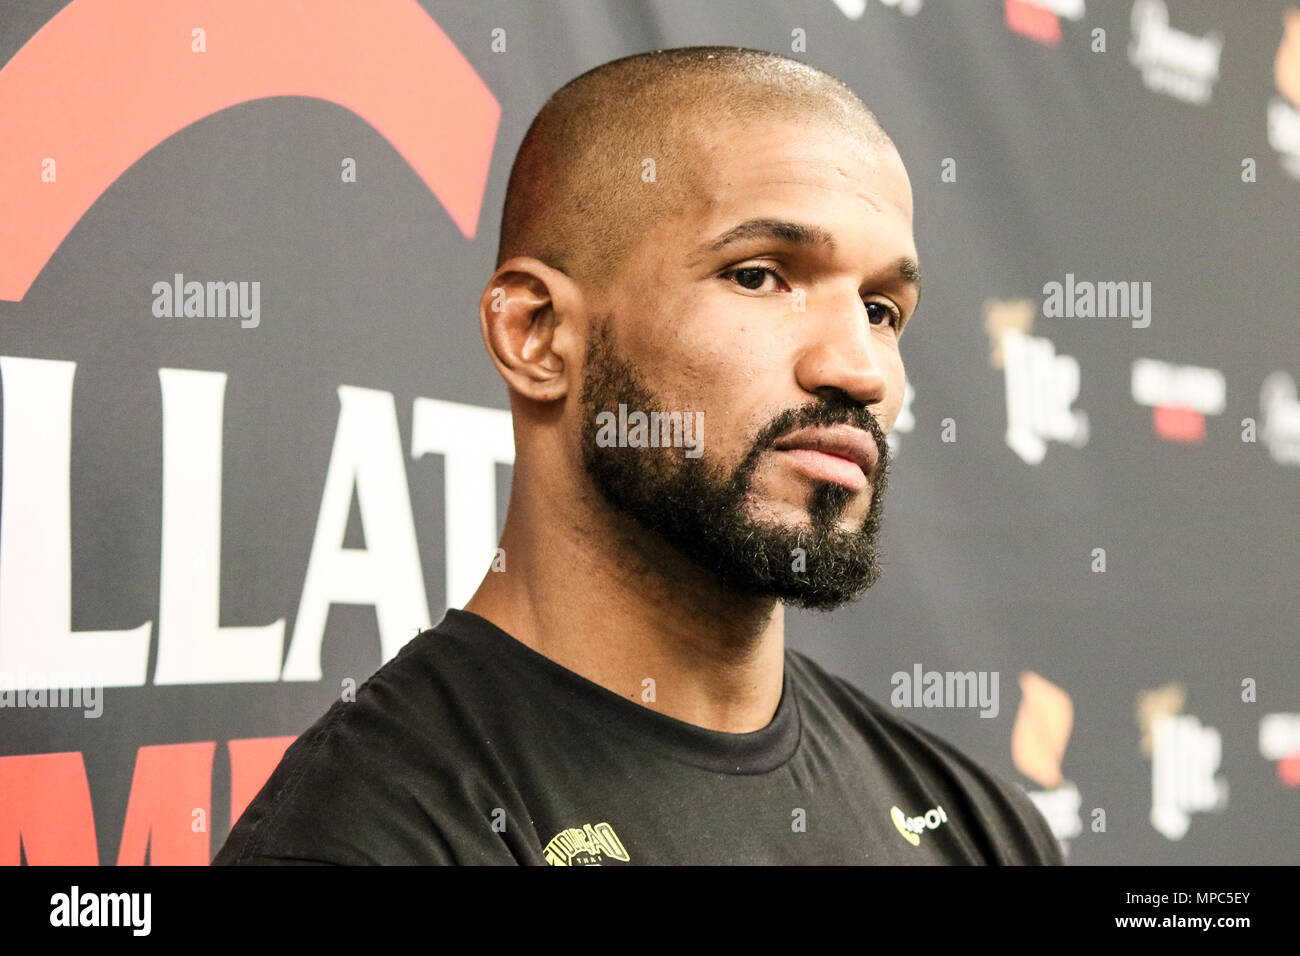 London, UK. 22nd May 2018. Rafael Carvalho picks up a fight at last minuite after Mirko Cro Cop picks up an injury works out ahead of his Bellator fight.  Credit: Dan Cooke Credit: Dan Cooke/Alamy Live News Stock Photo